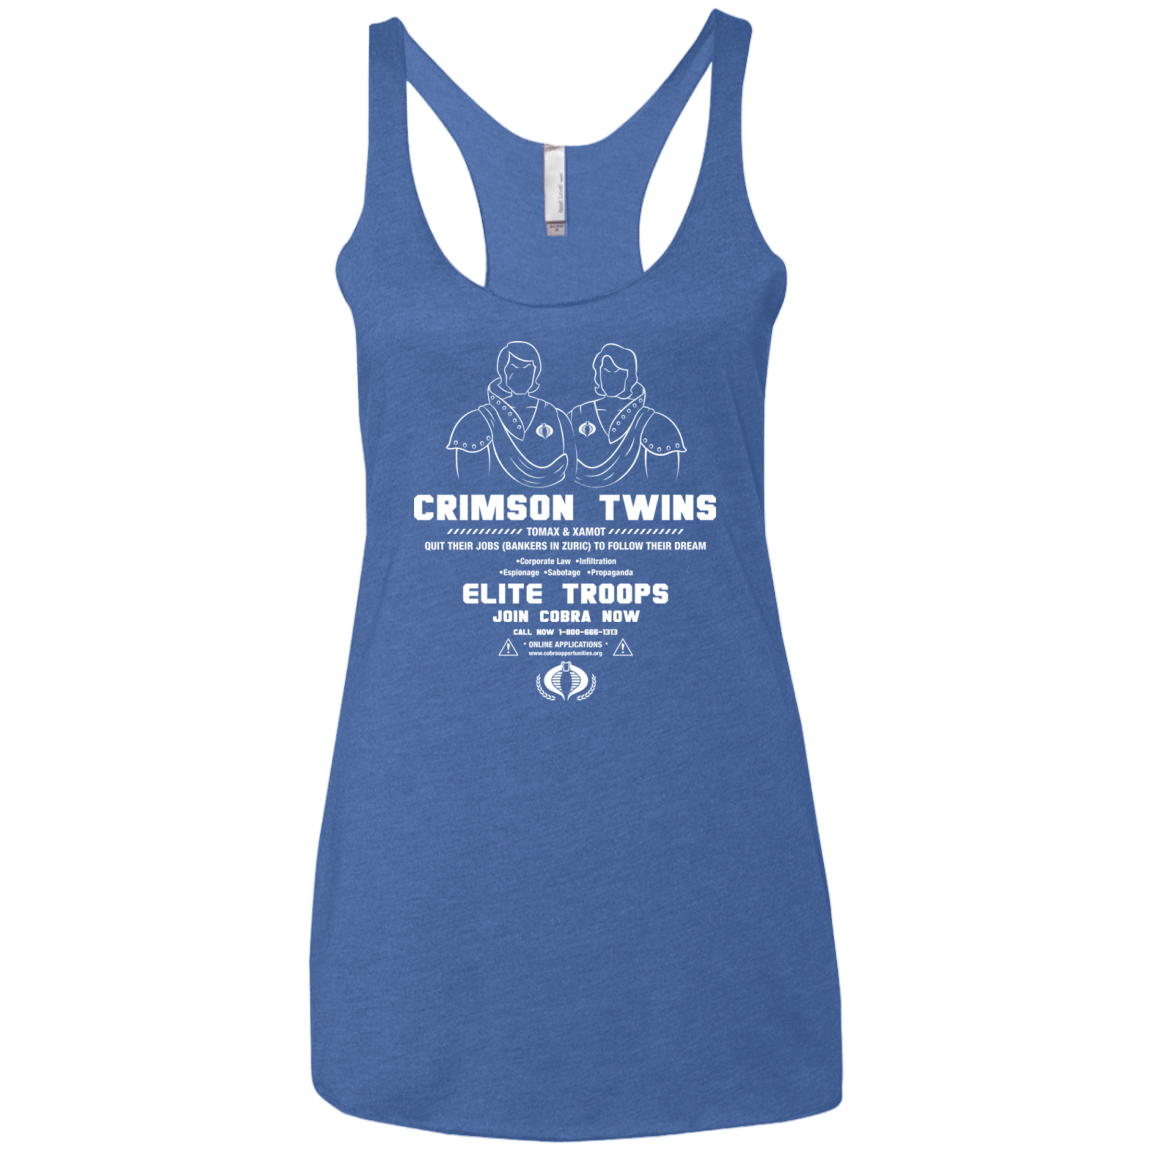 T-Shirts Vintage Royal / X-Small Career Opportunities Women's Triblend Racerback Tank